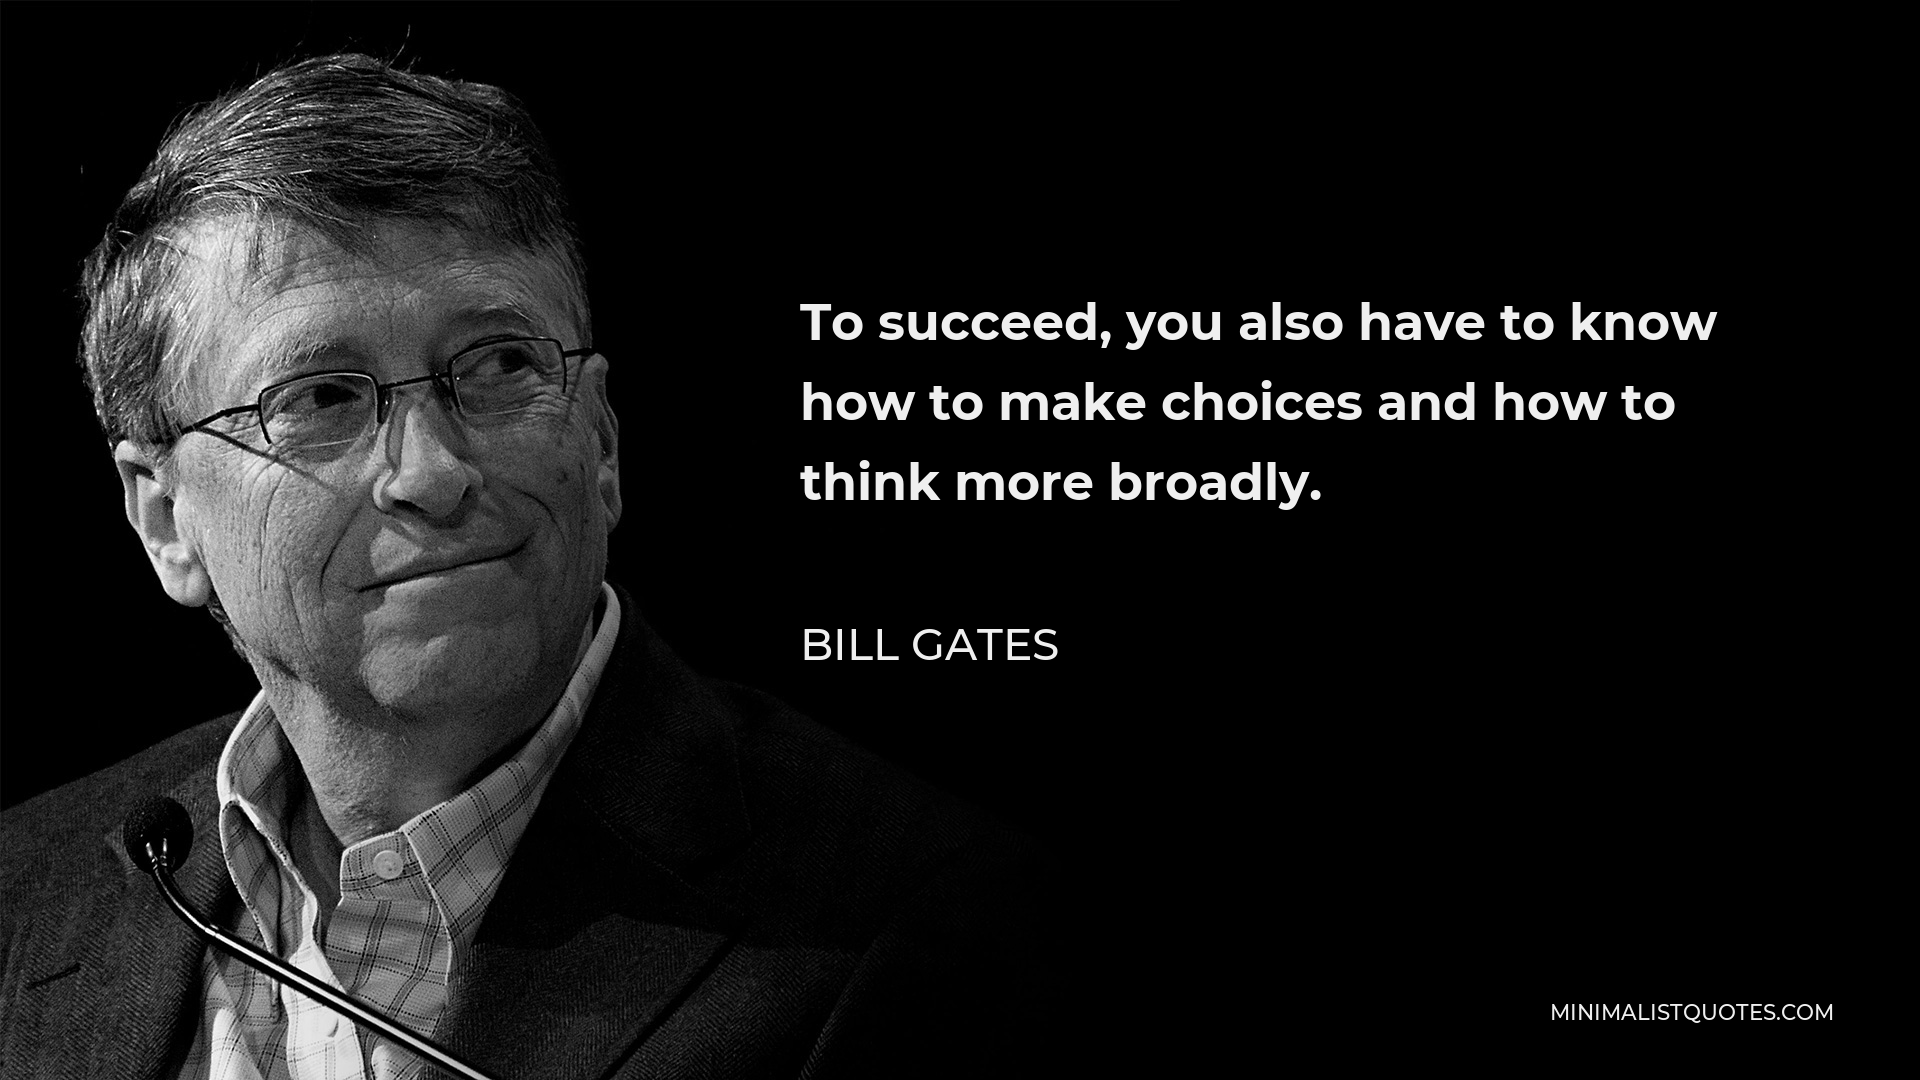 Bill Gates Quote - To succeed, you also have to know how to make choices and how to think more broadly.